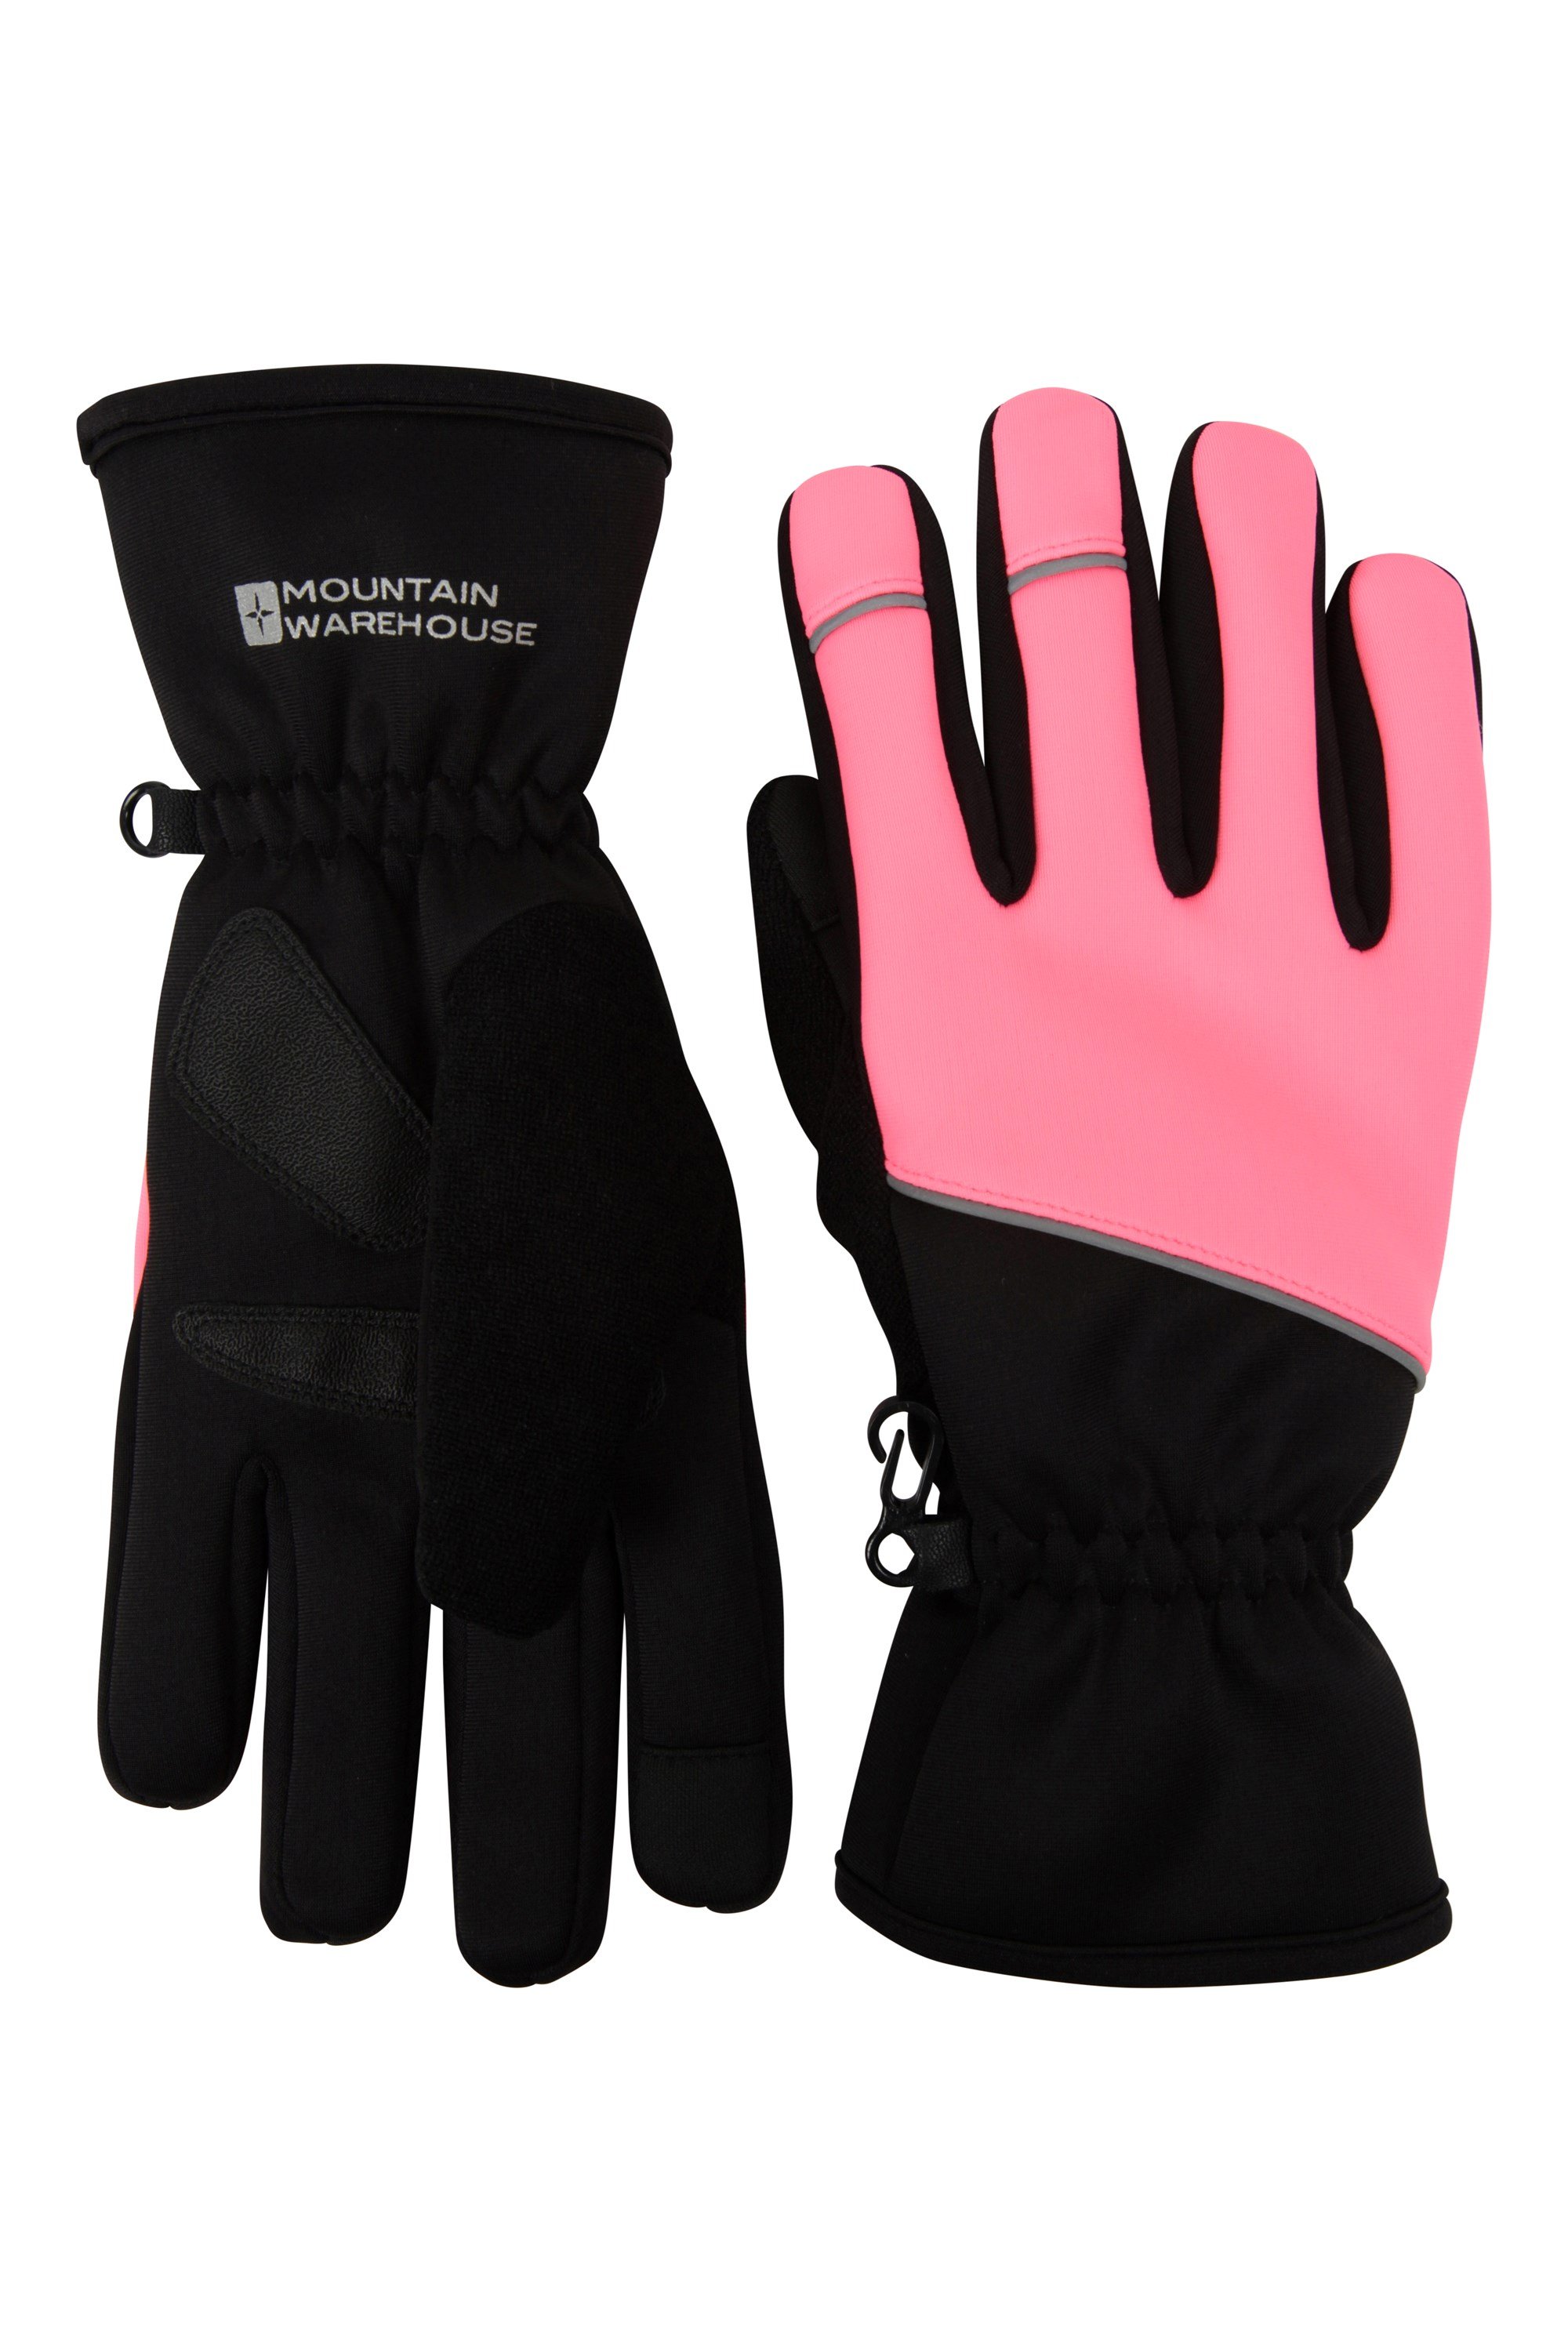 https://img.cdn.mountainwarehouse.com/product/051466/051466_pin_swift_womens_water_resistant_cycling_gloves_acc_aw22_01.jpg